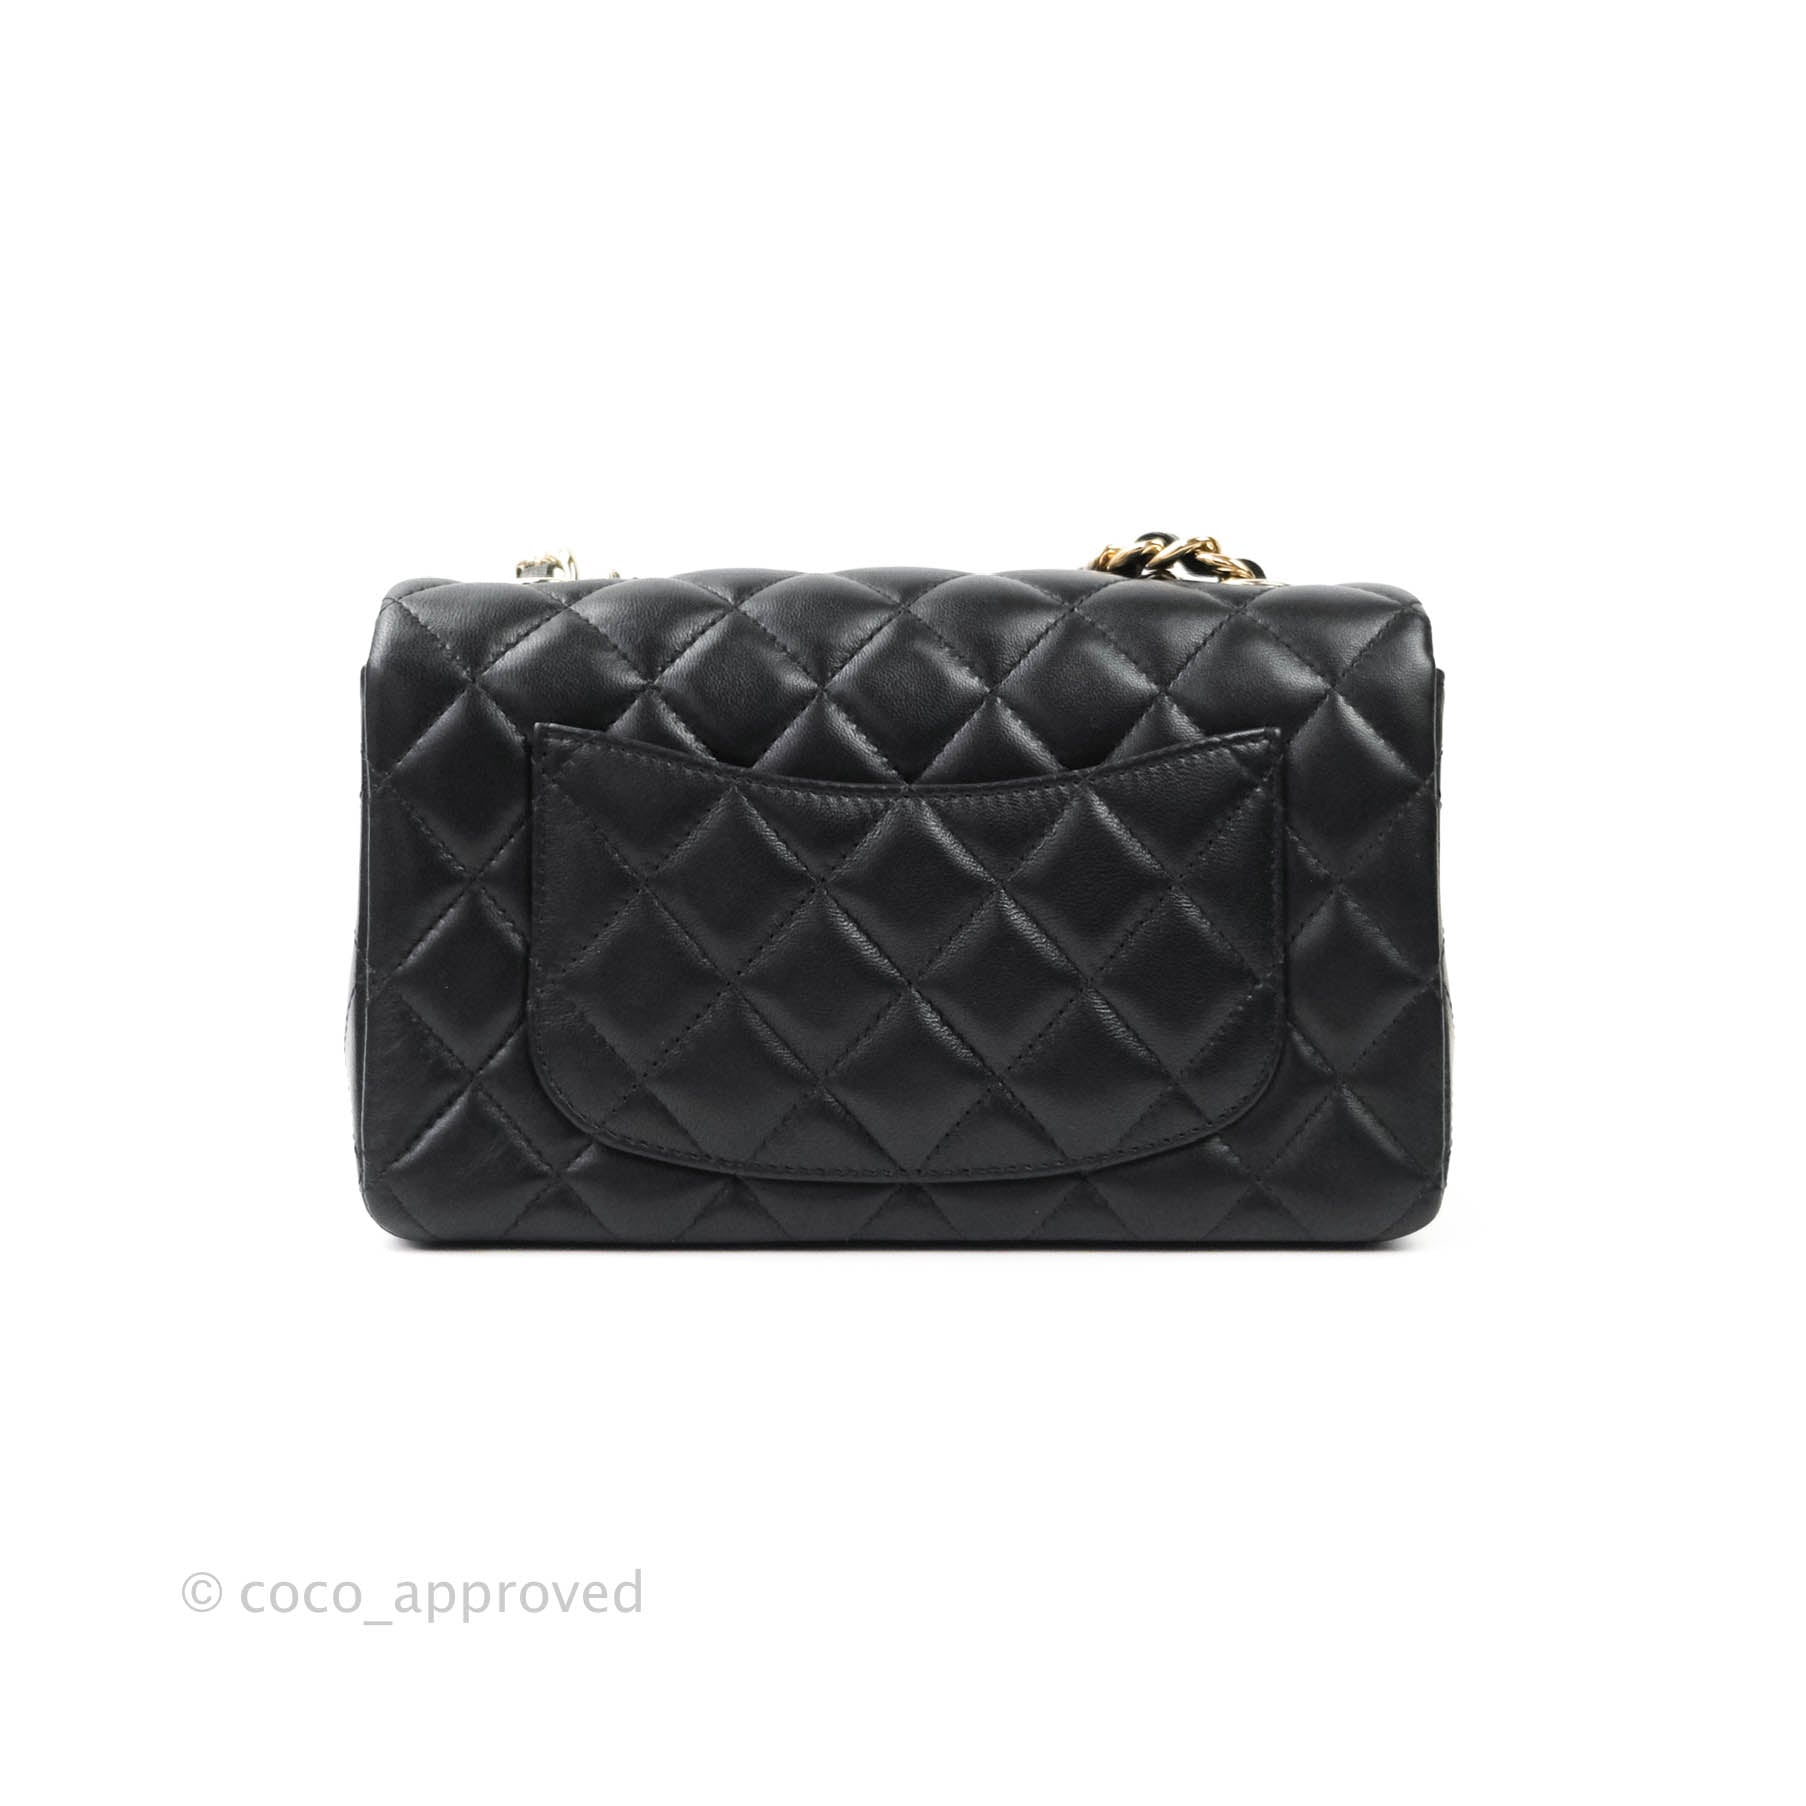 Chanel Quilted Mini Rectangular Lambskin Black Flap With Charms